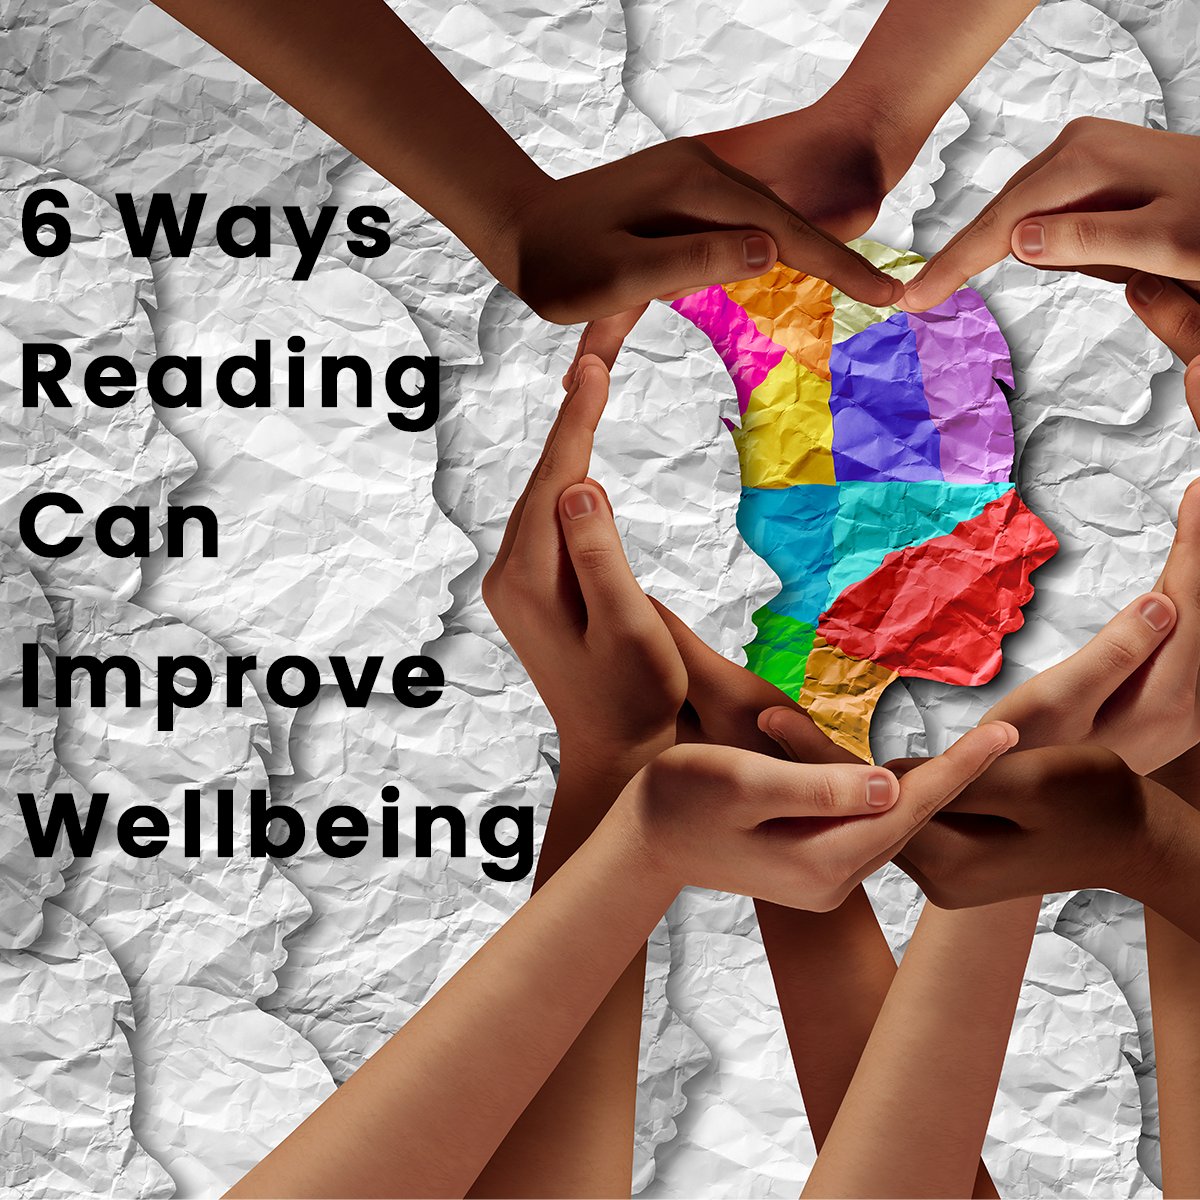 In 2023, 1 in 5 eight to sixteen-year-olds were identified as having a probable mental health disorder (NHS Digital). Help young people discover the power of reading to improve #Wellbeing & #MentalHealth🧠📚 #ReadingForWellbeing ow.ly/nVlq50QvV3w